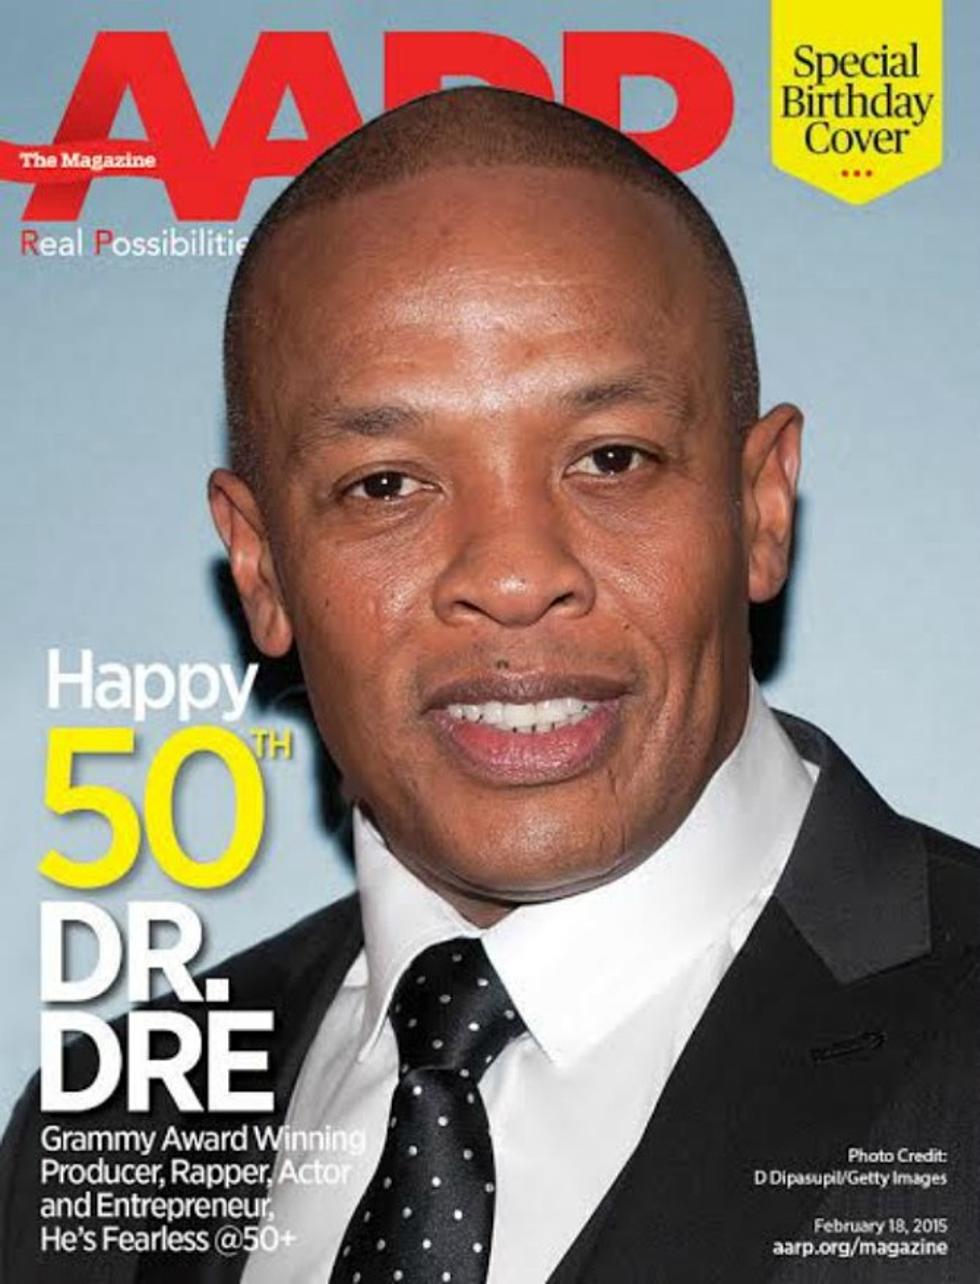 Dr. Dre to Cover AARP Magazine